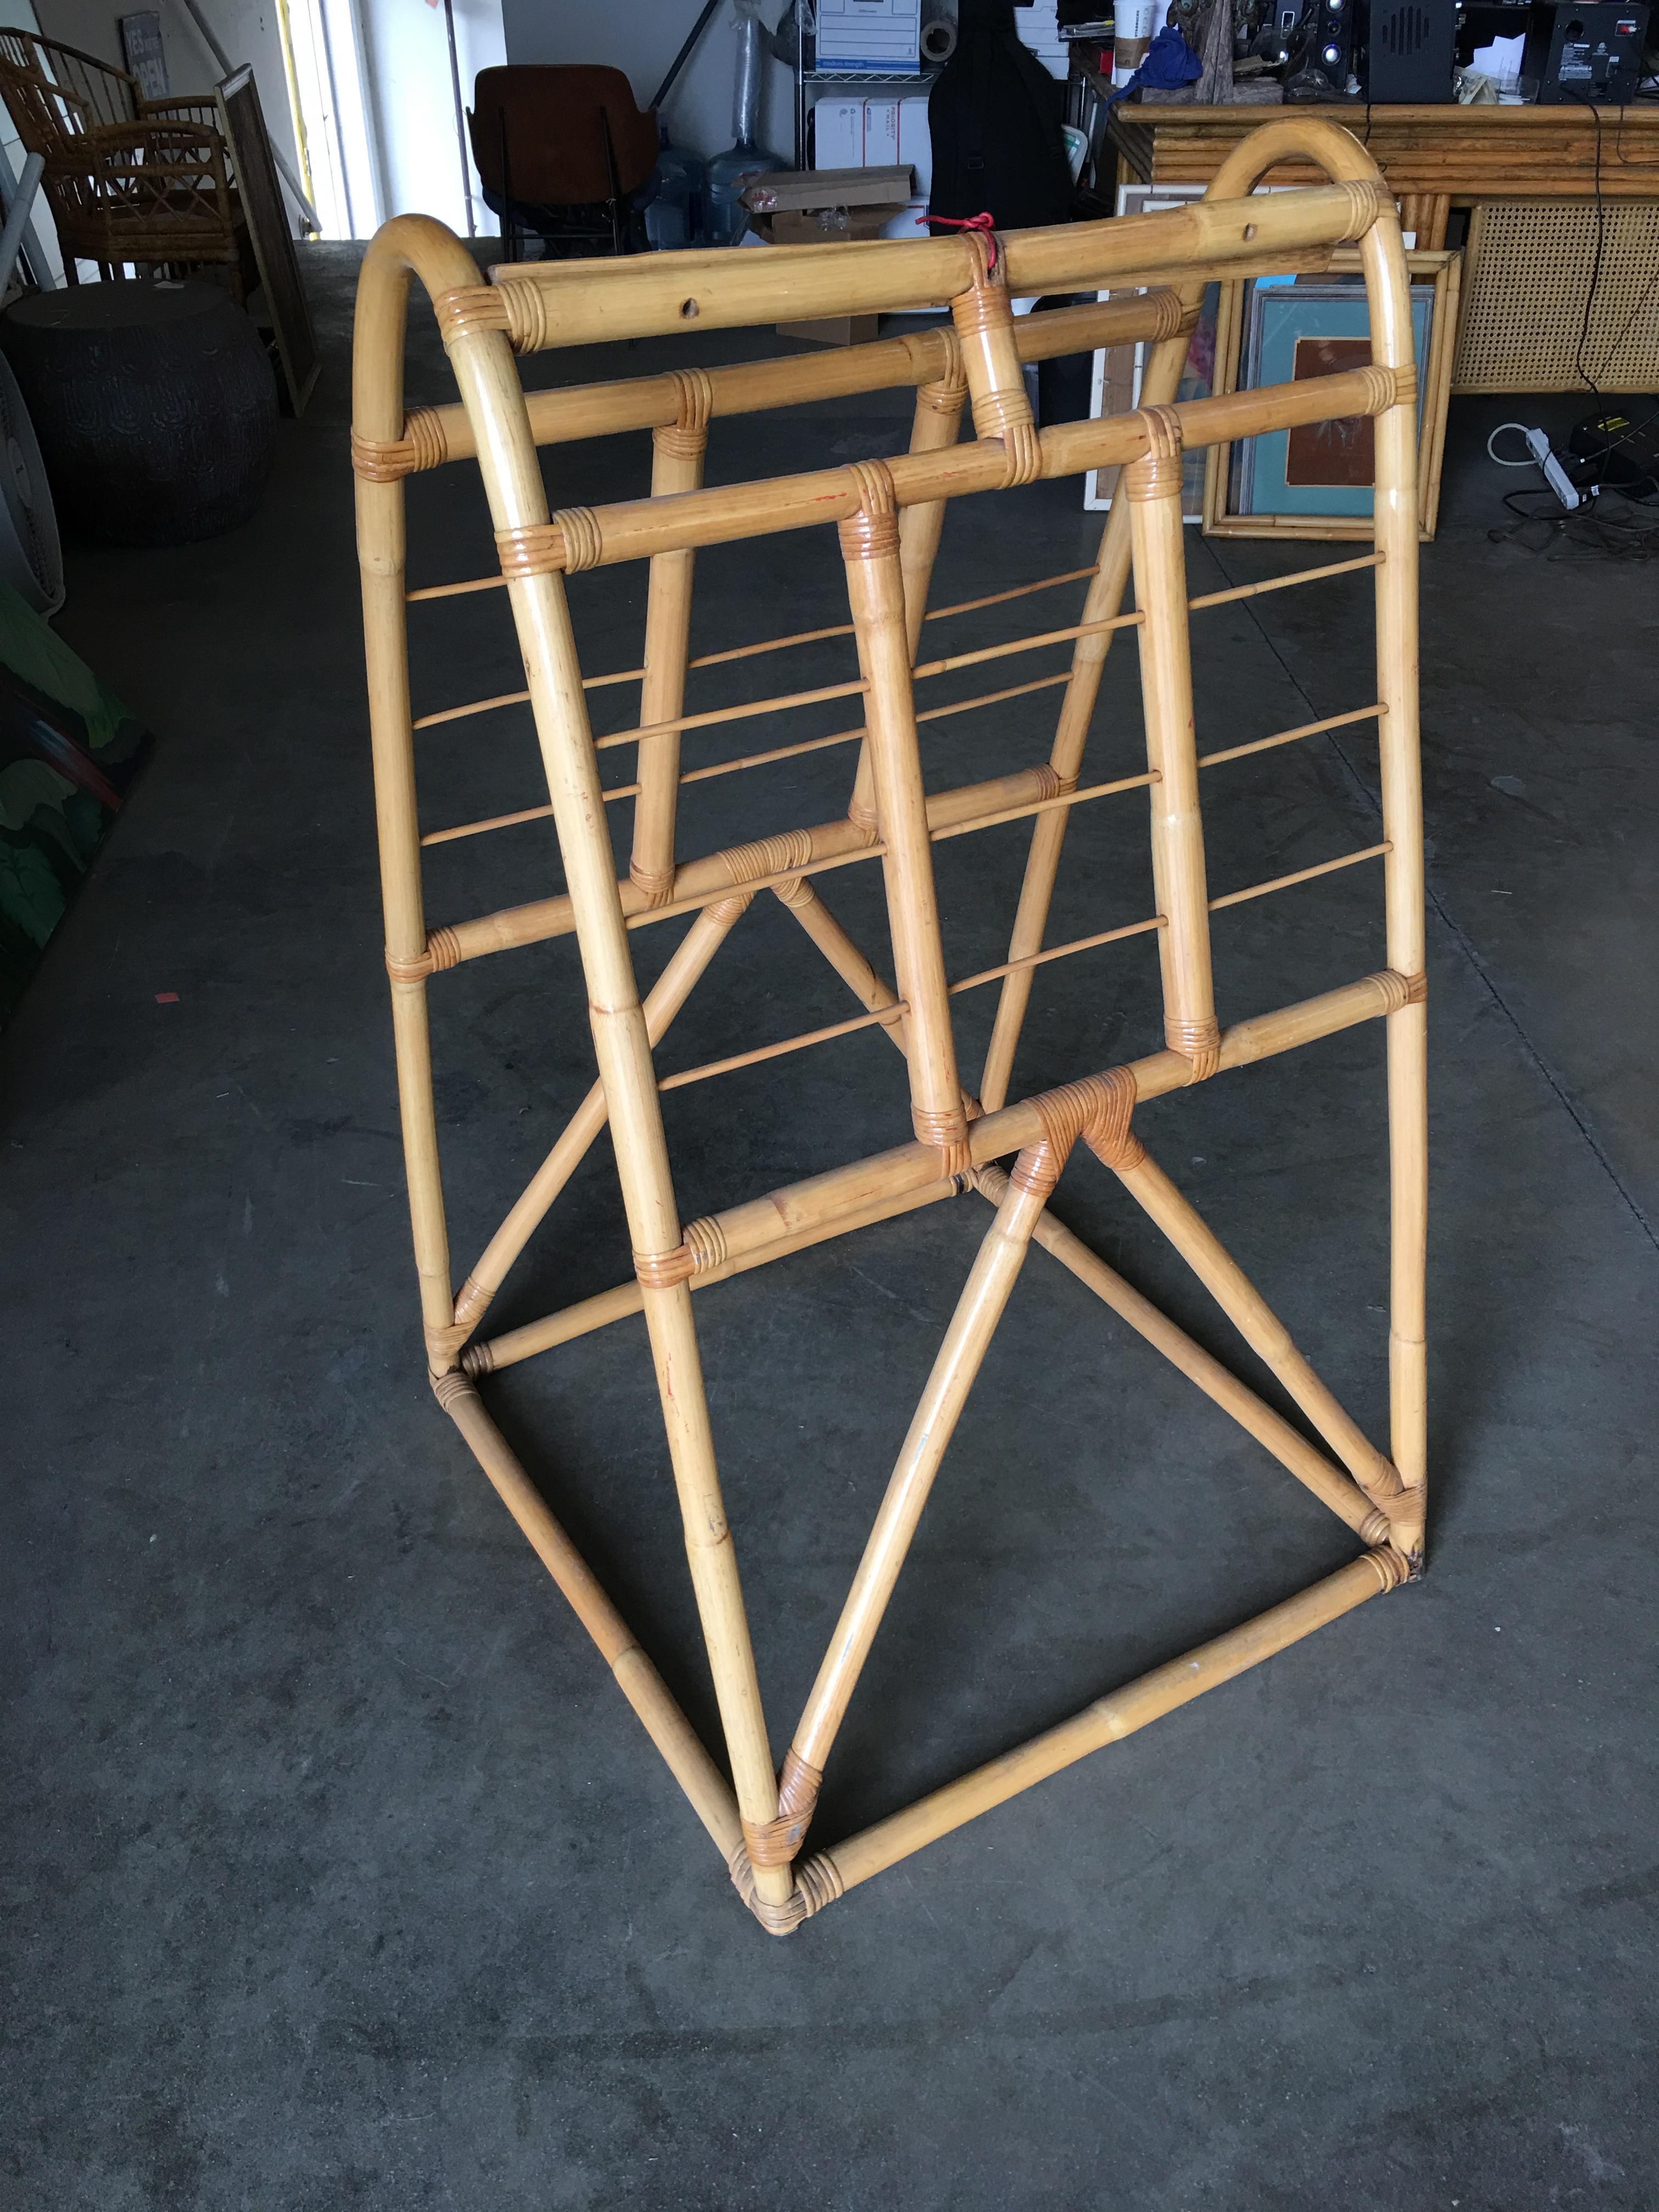 Circa 1950 rattan drying rack featuring an arch-shaped stand with 18 bars for drying your clothing and linens.

All pieces listed are professionally restored.  All our rattan, bamboo, and wicker furniture has been painstakingly refurbished to the